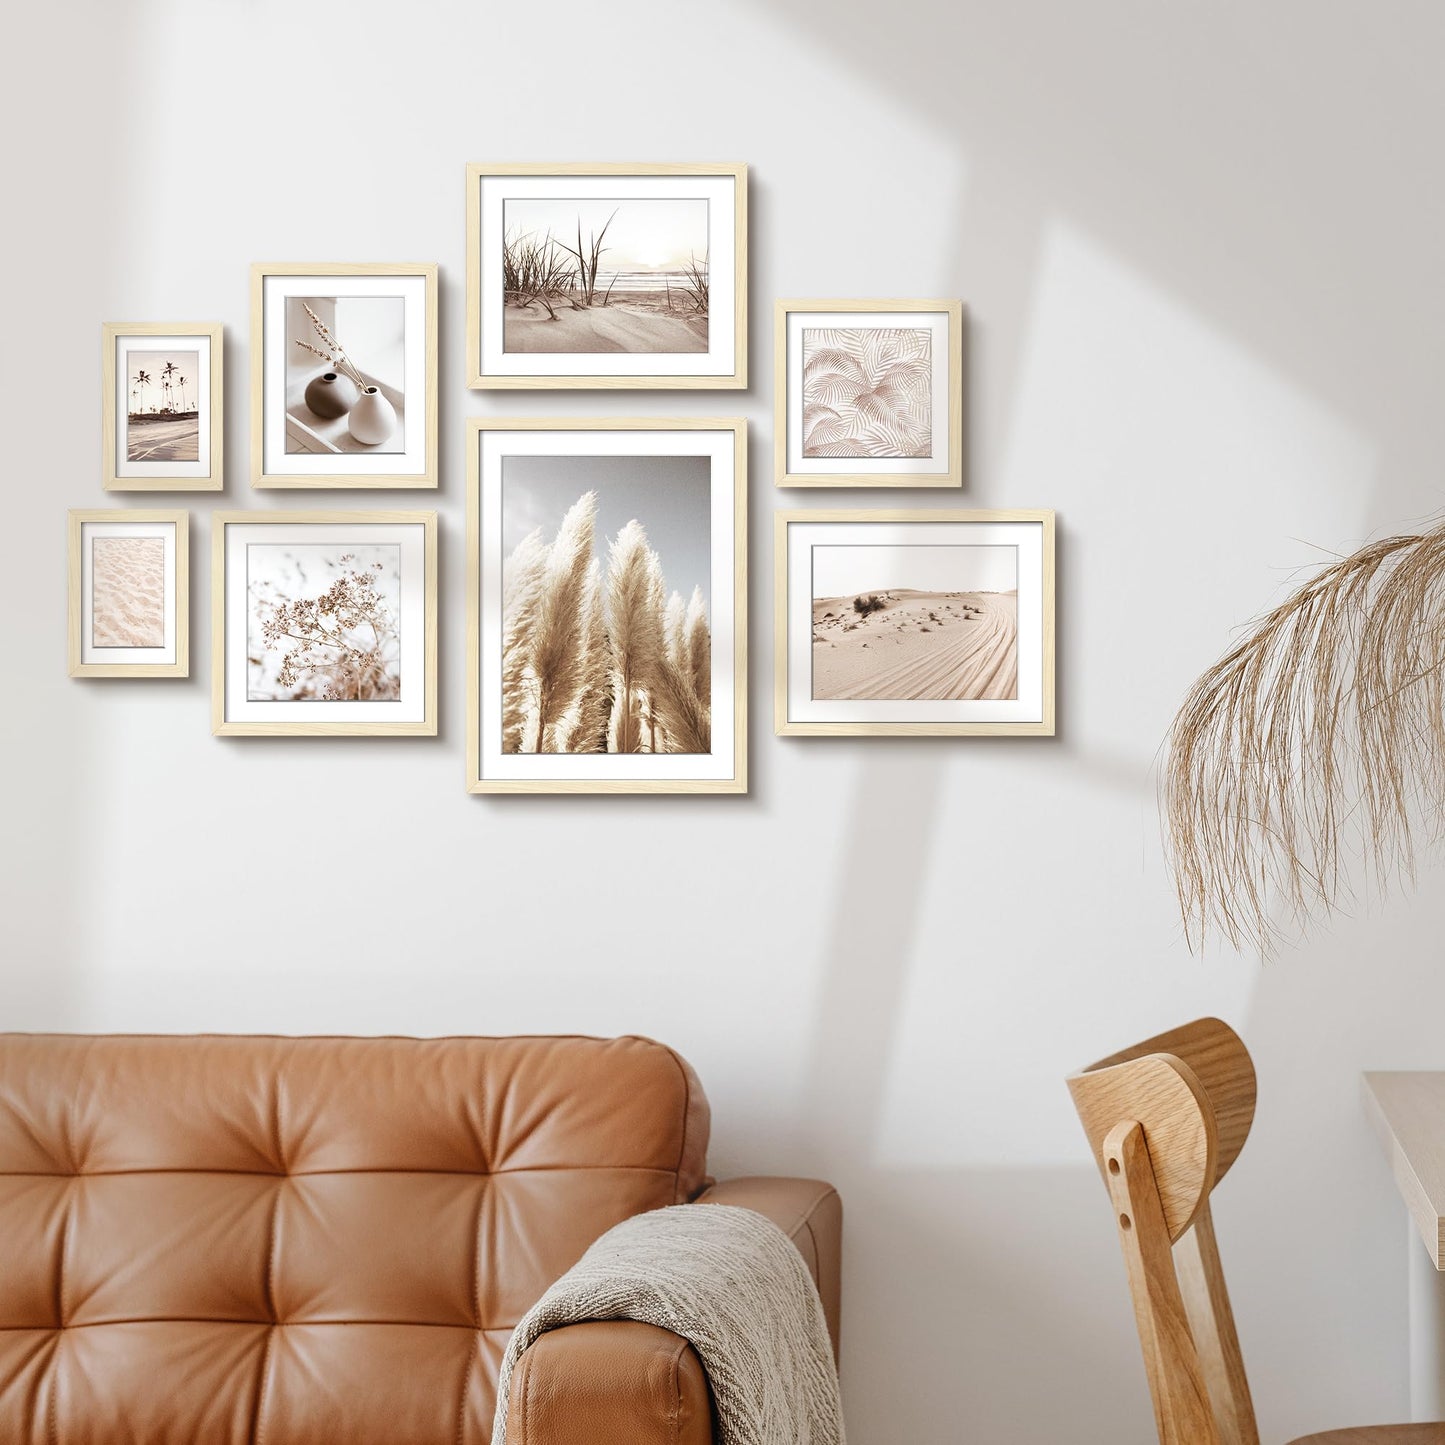 ArtbyHannah 8 Pack Gallery Wall Frame Set Neutral Wall Art Decor,Picture Frames Collage Wall Decor with Desert Pictures,Multiple Sizes…